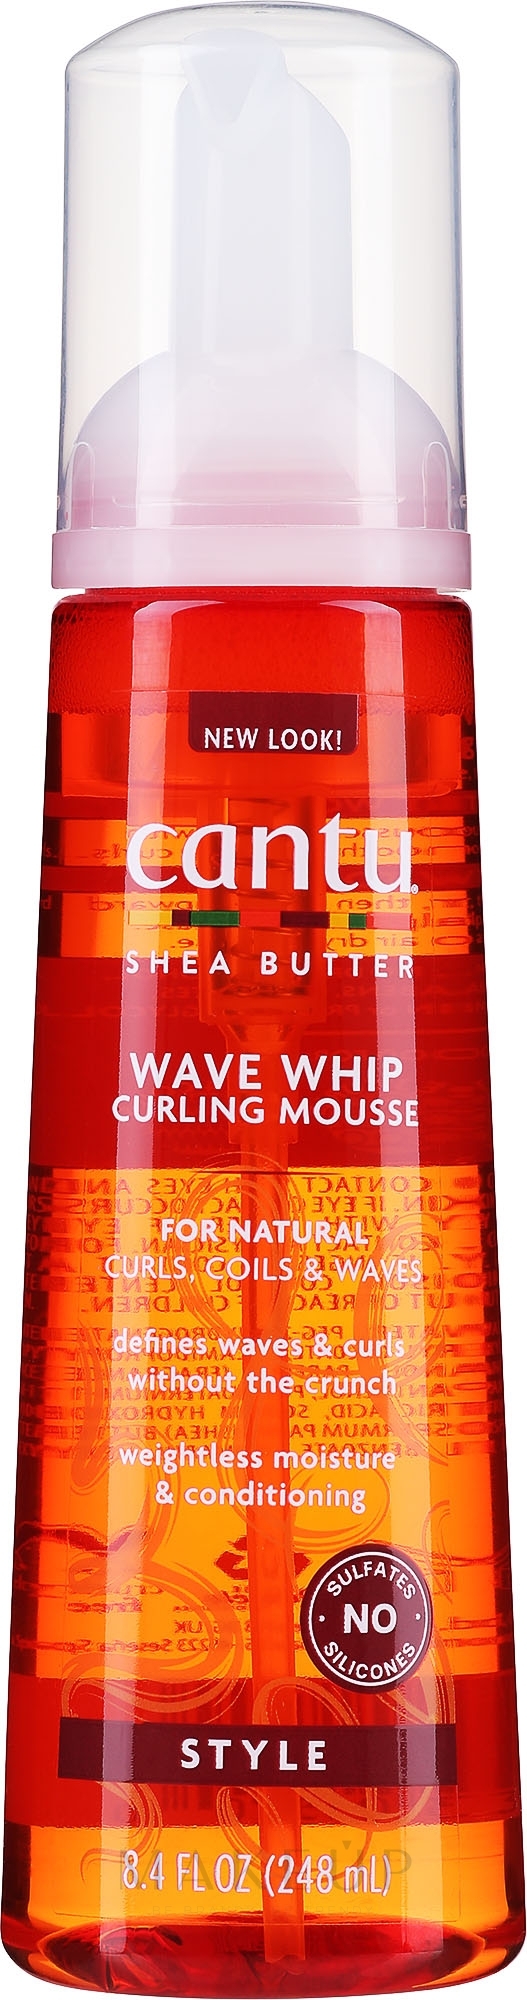 Haarstyling-Mousse - Cantu Shea Butter Natural Hair Wave Whip Curling Mousse — Bild 248 ml